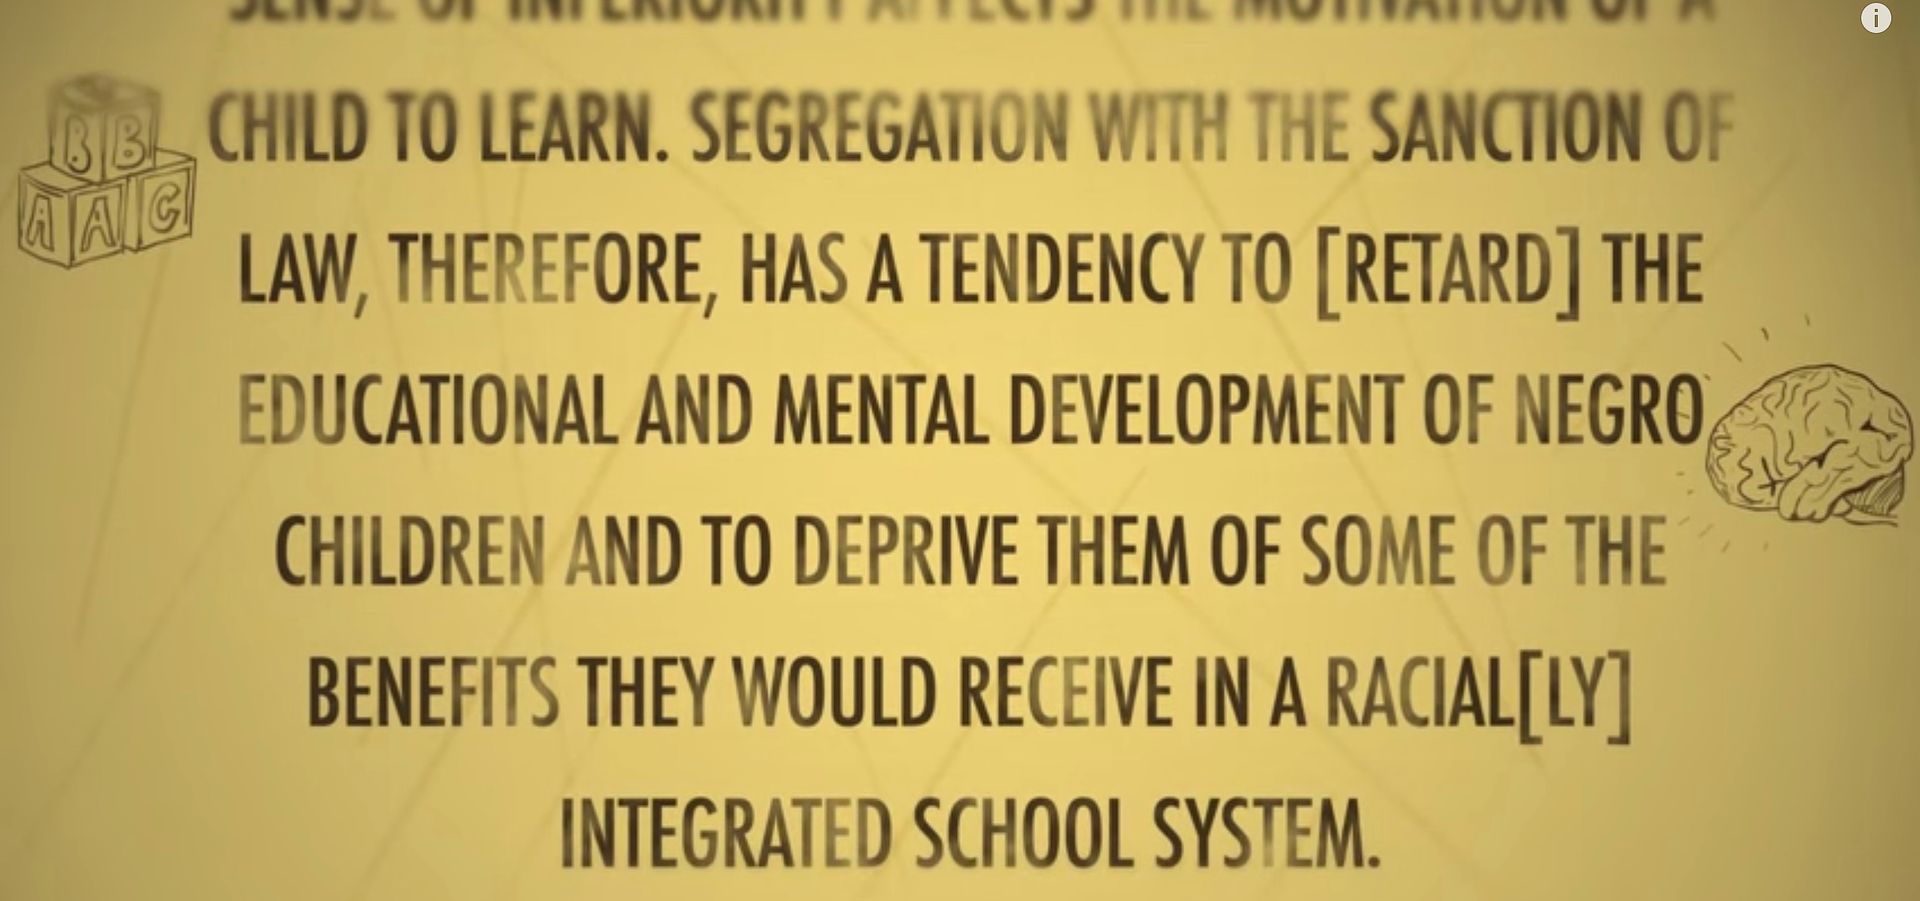 MLK Day resources: Explaining segregation on the Crash Course US History videos